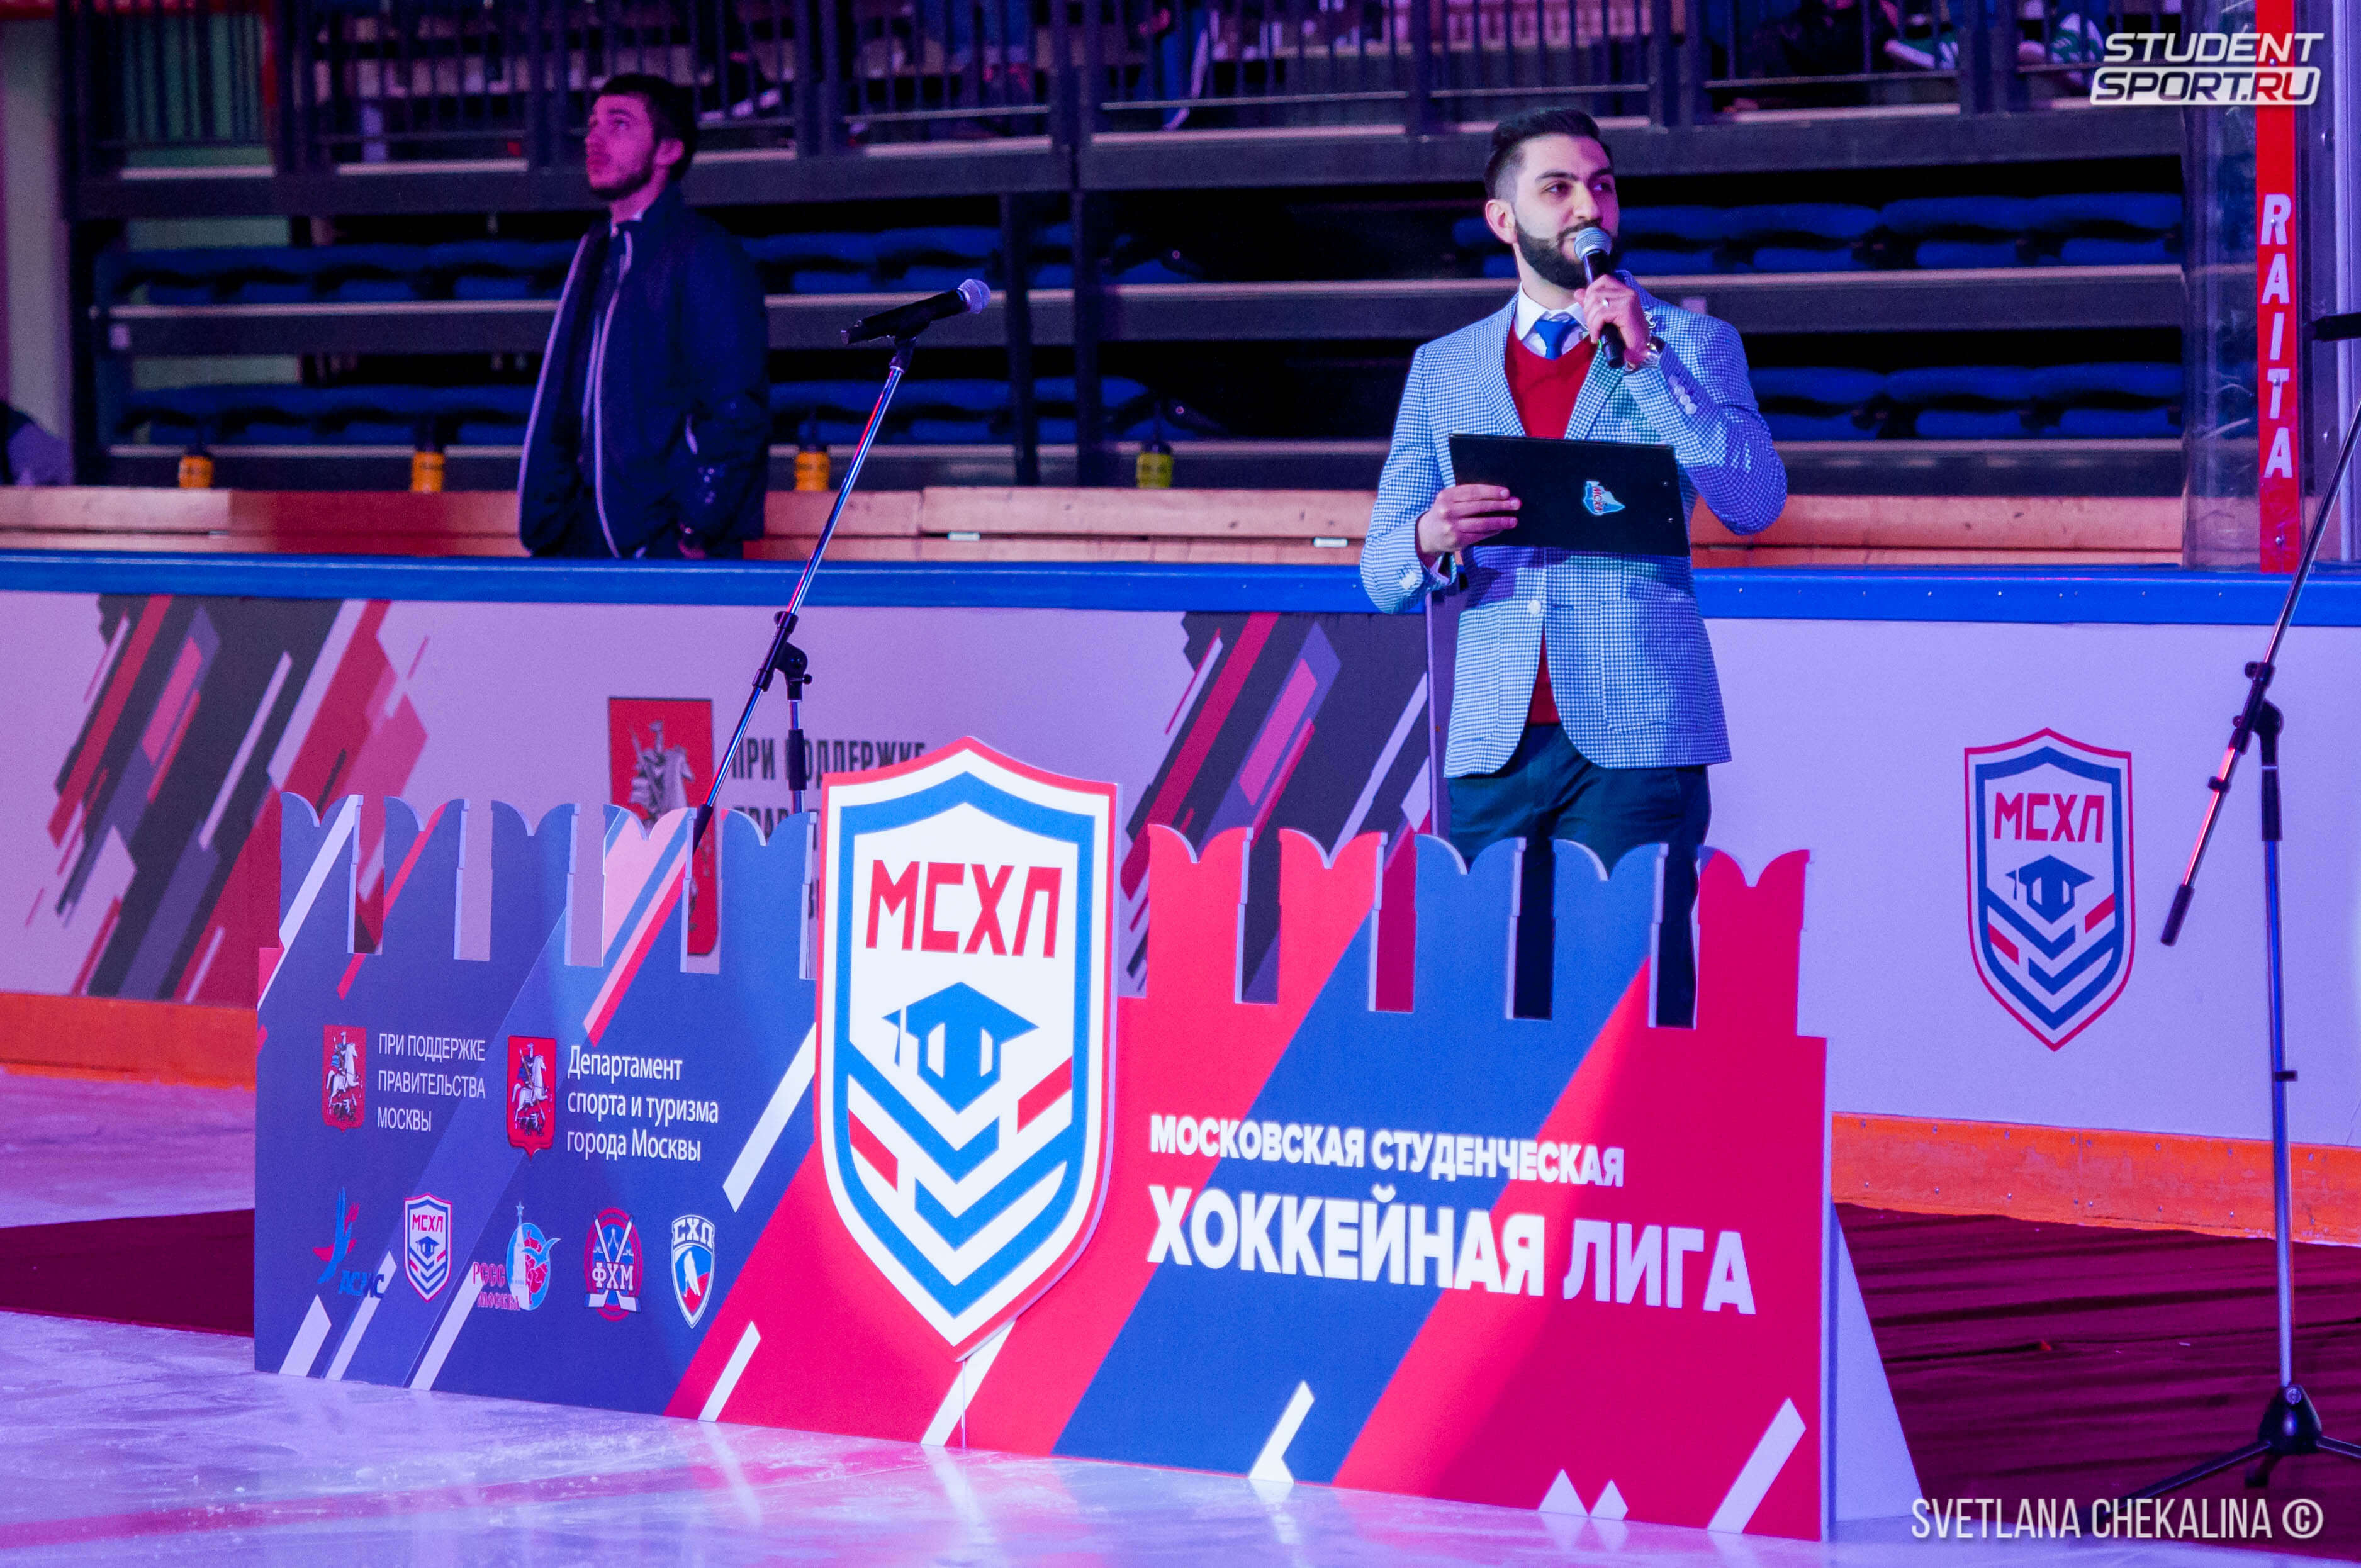 The final hockey match of Moscow Student Hockey League, involving states